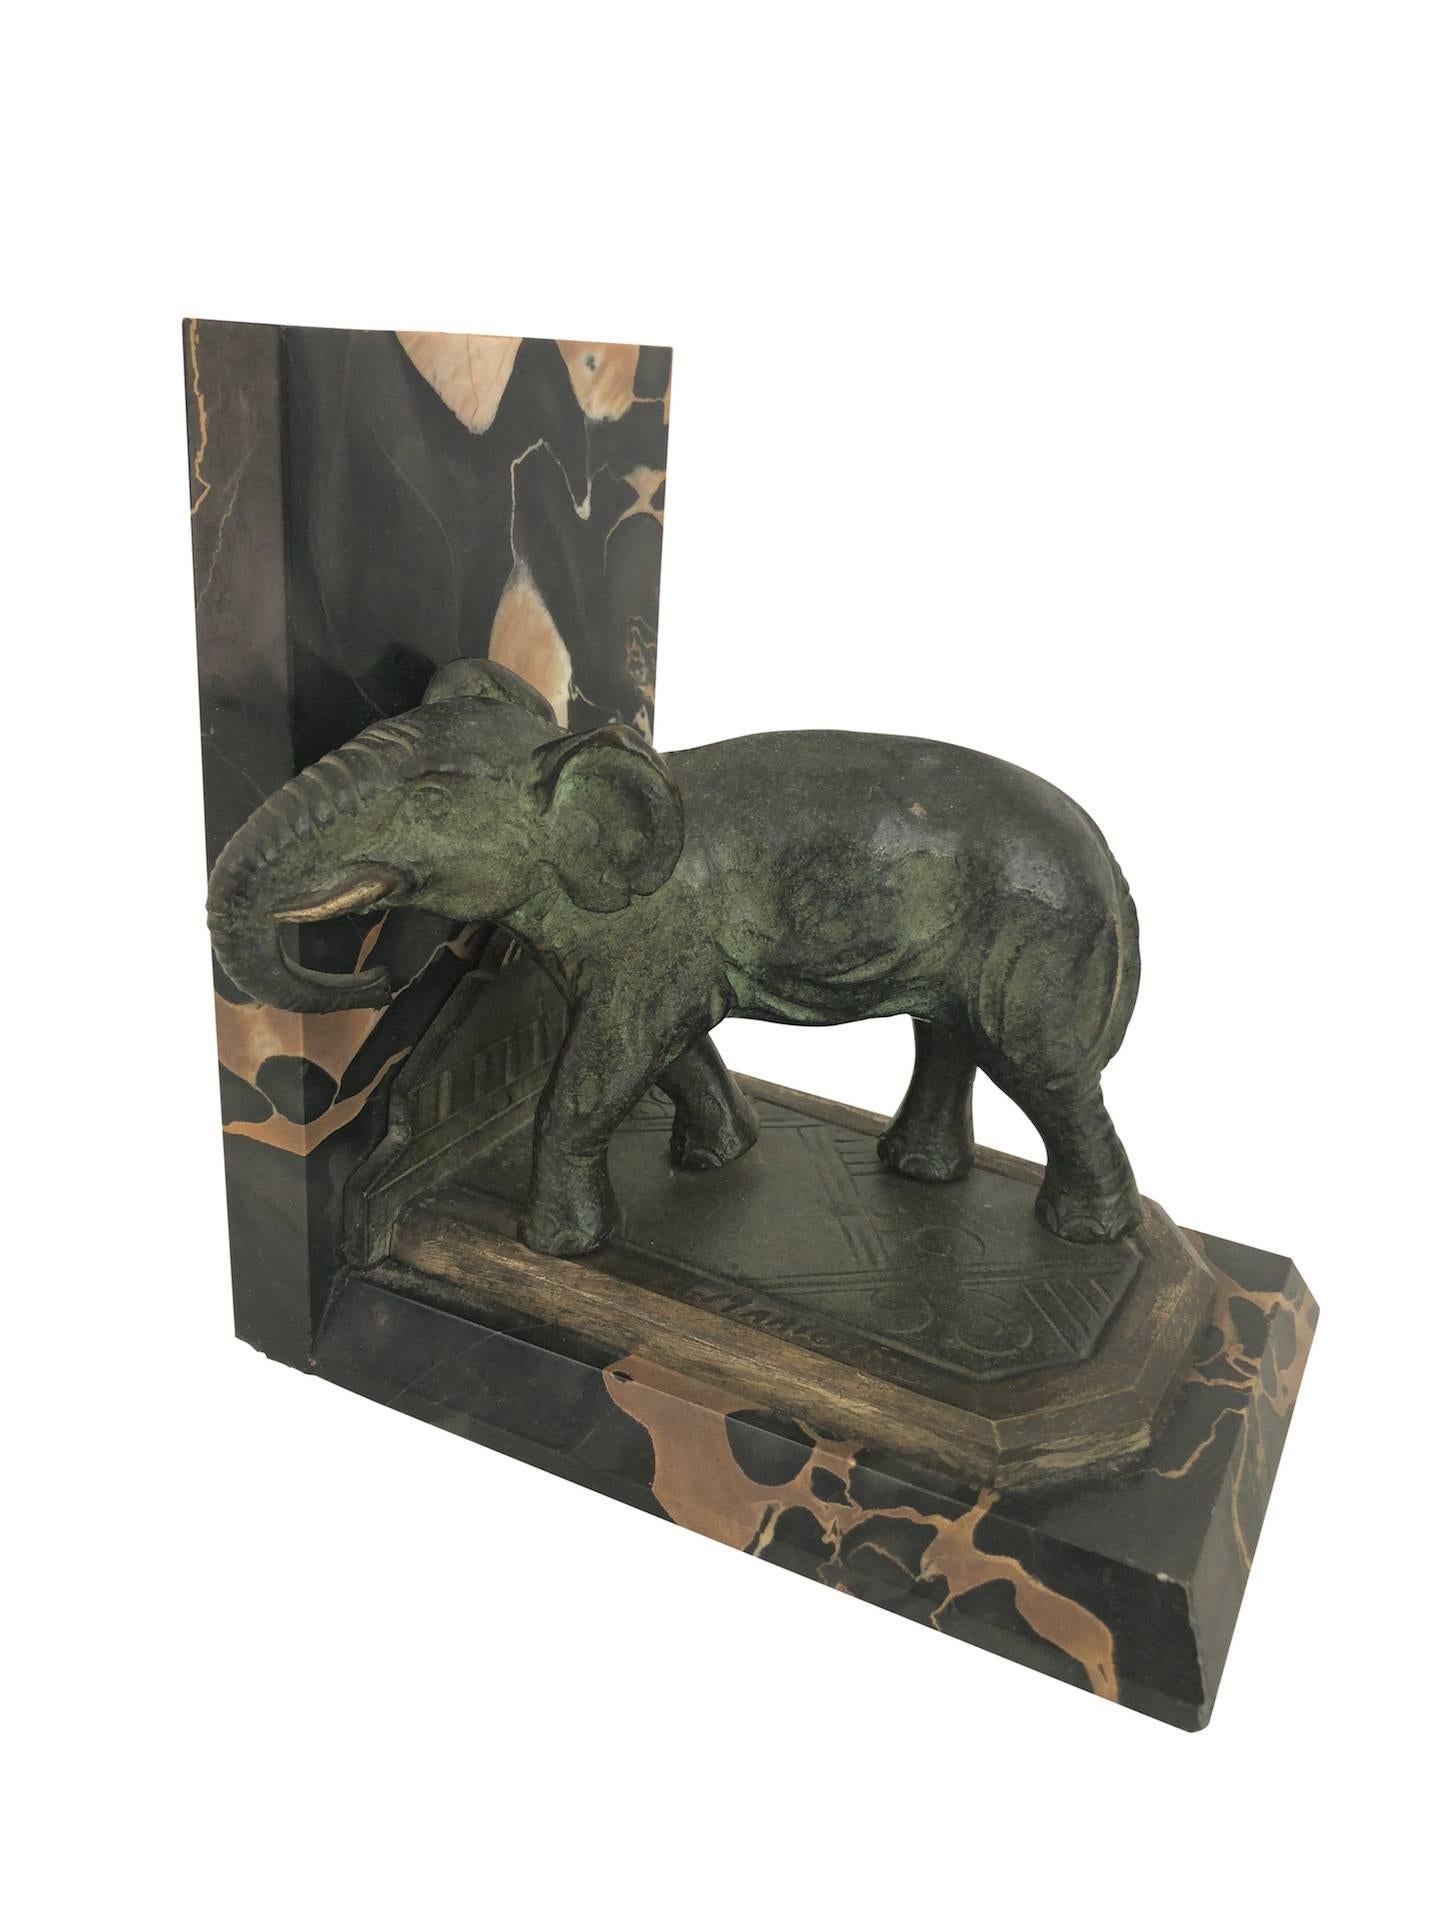 Early 20th Century Art Nouveau Marble-Bookends with Bronze-Elephants by MARIONNET, France, 1900s